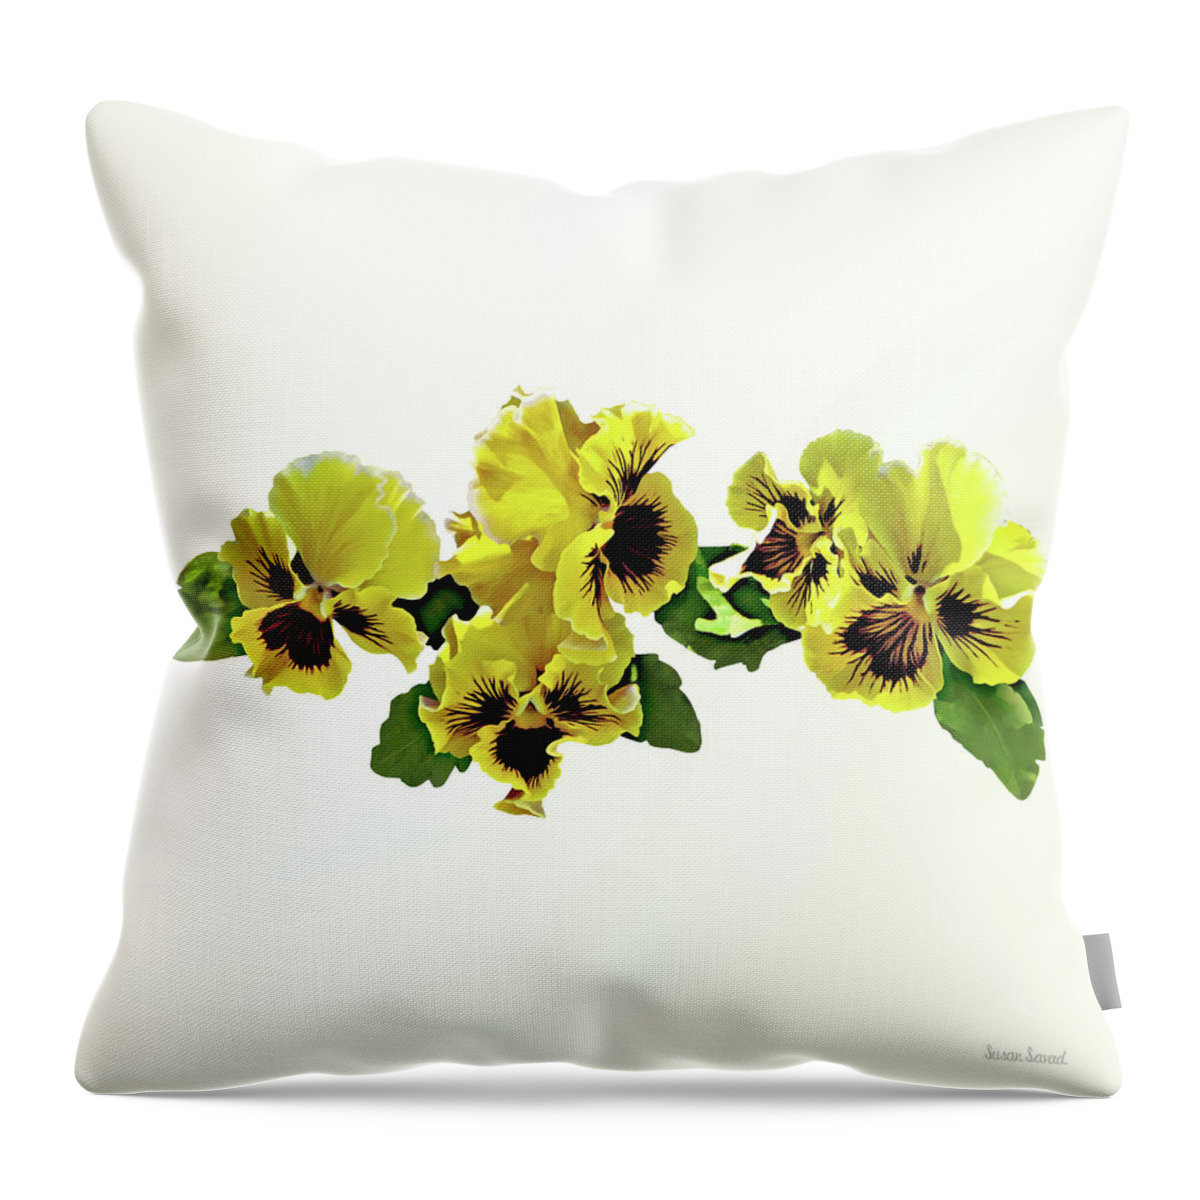 Pansy Throw Pillow featuring the photograph Frilly Yellow Pansies by Susan Savad